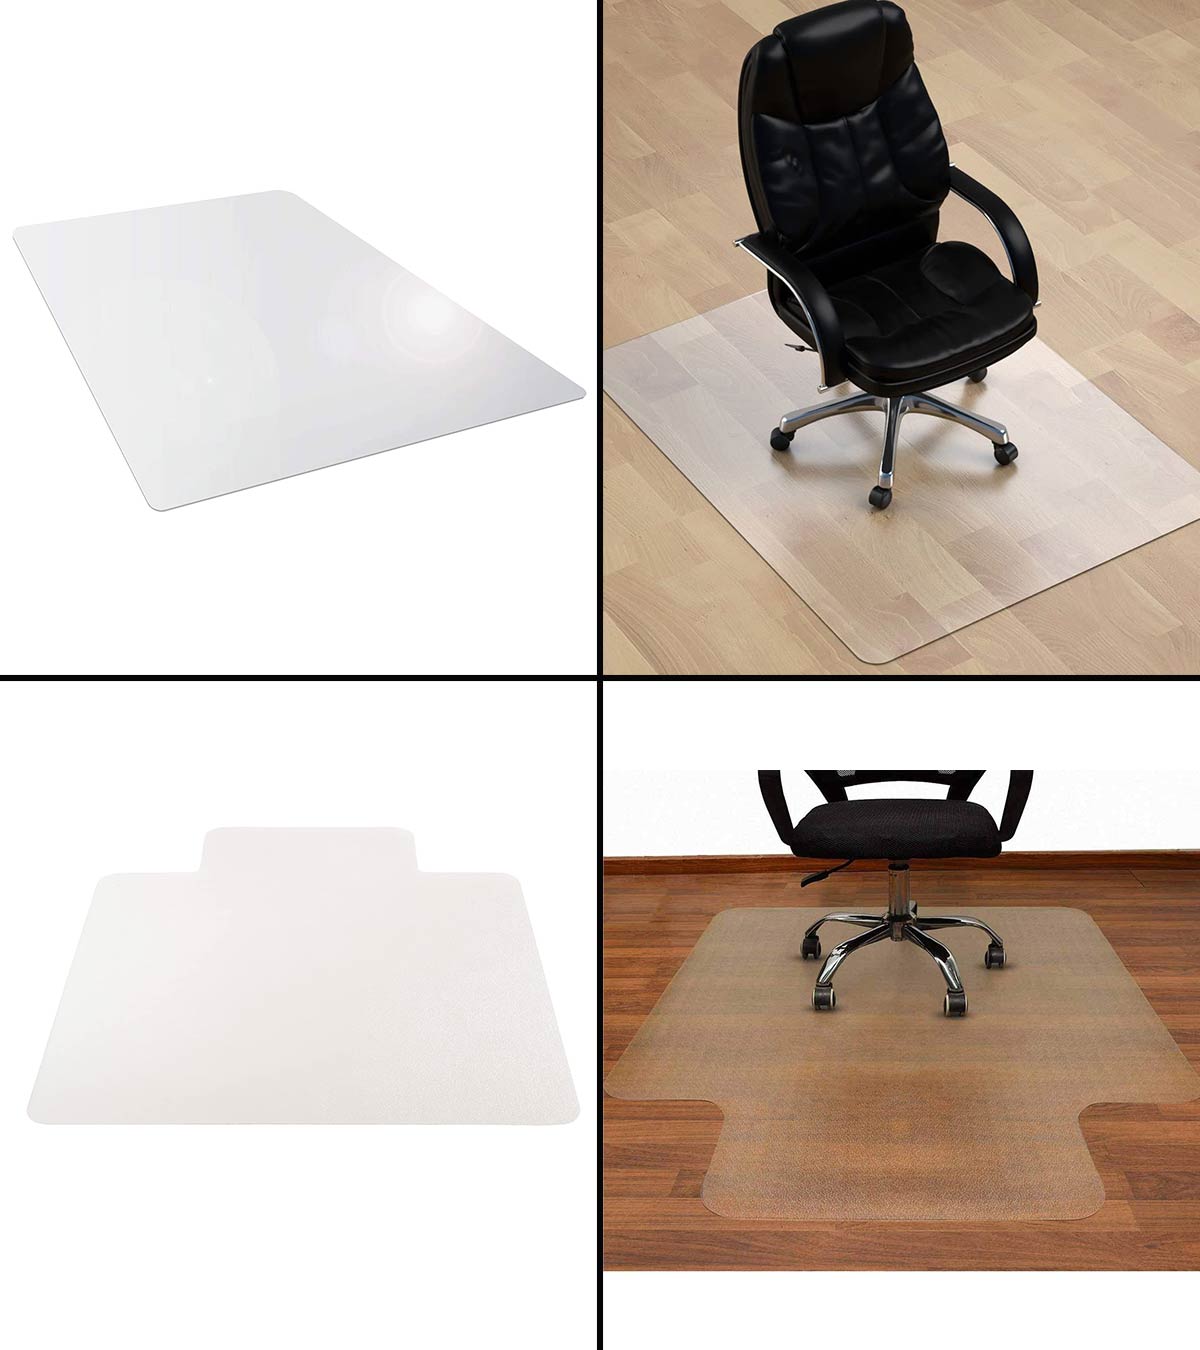 Textured Surface for Easy Roll Computer Desk Protector 48X36 Easy Flat and Clean Office Chair Mat Protector for Hardwood Floor 2mm Thick Durable Hard Floor Desk Chair Mats with Lip 